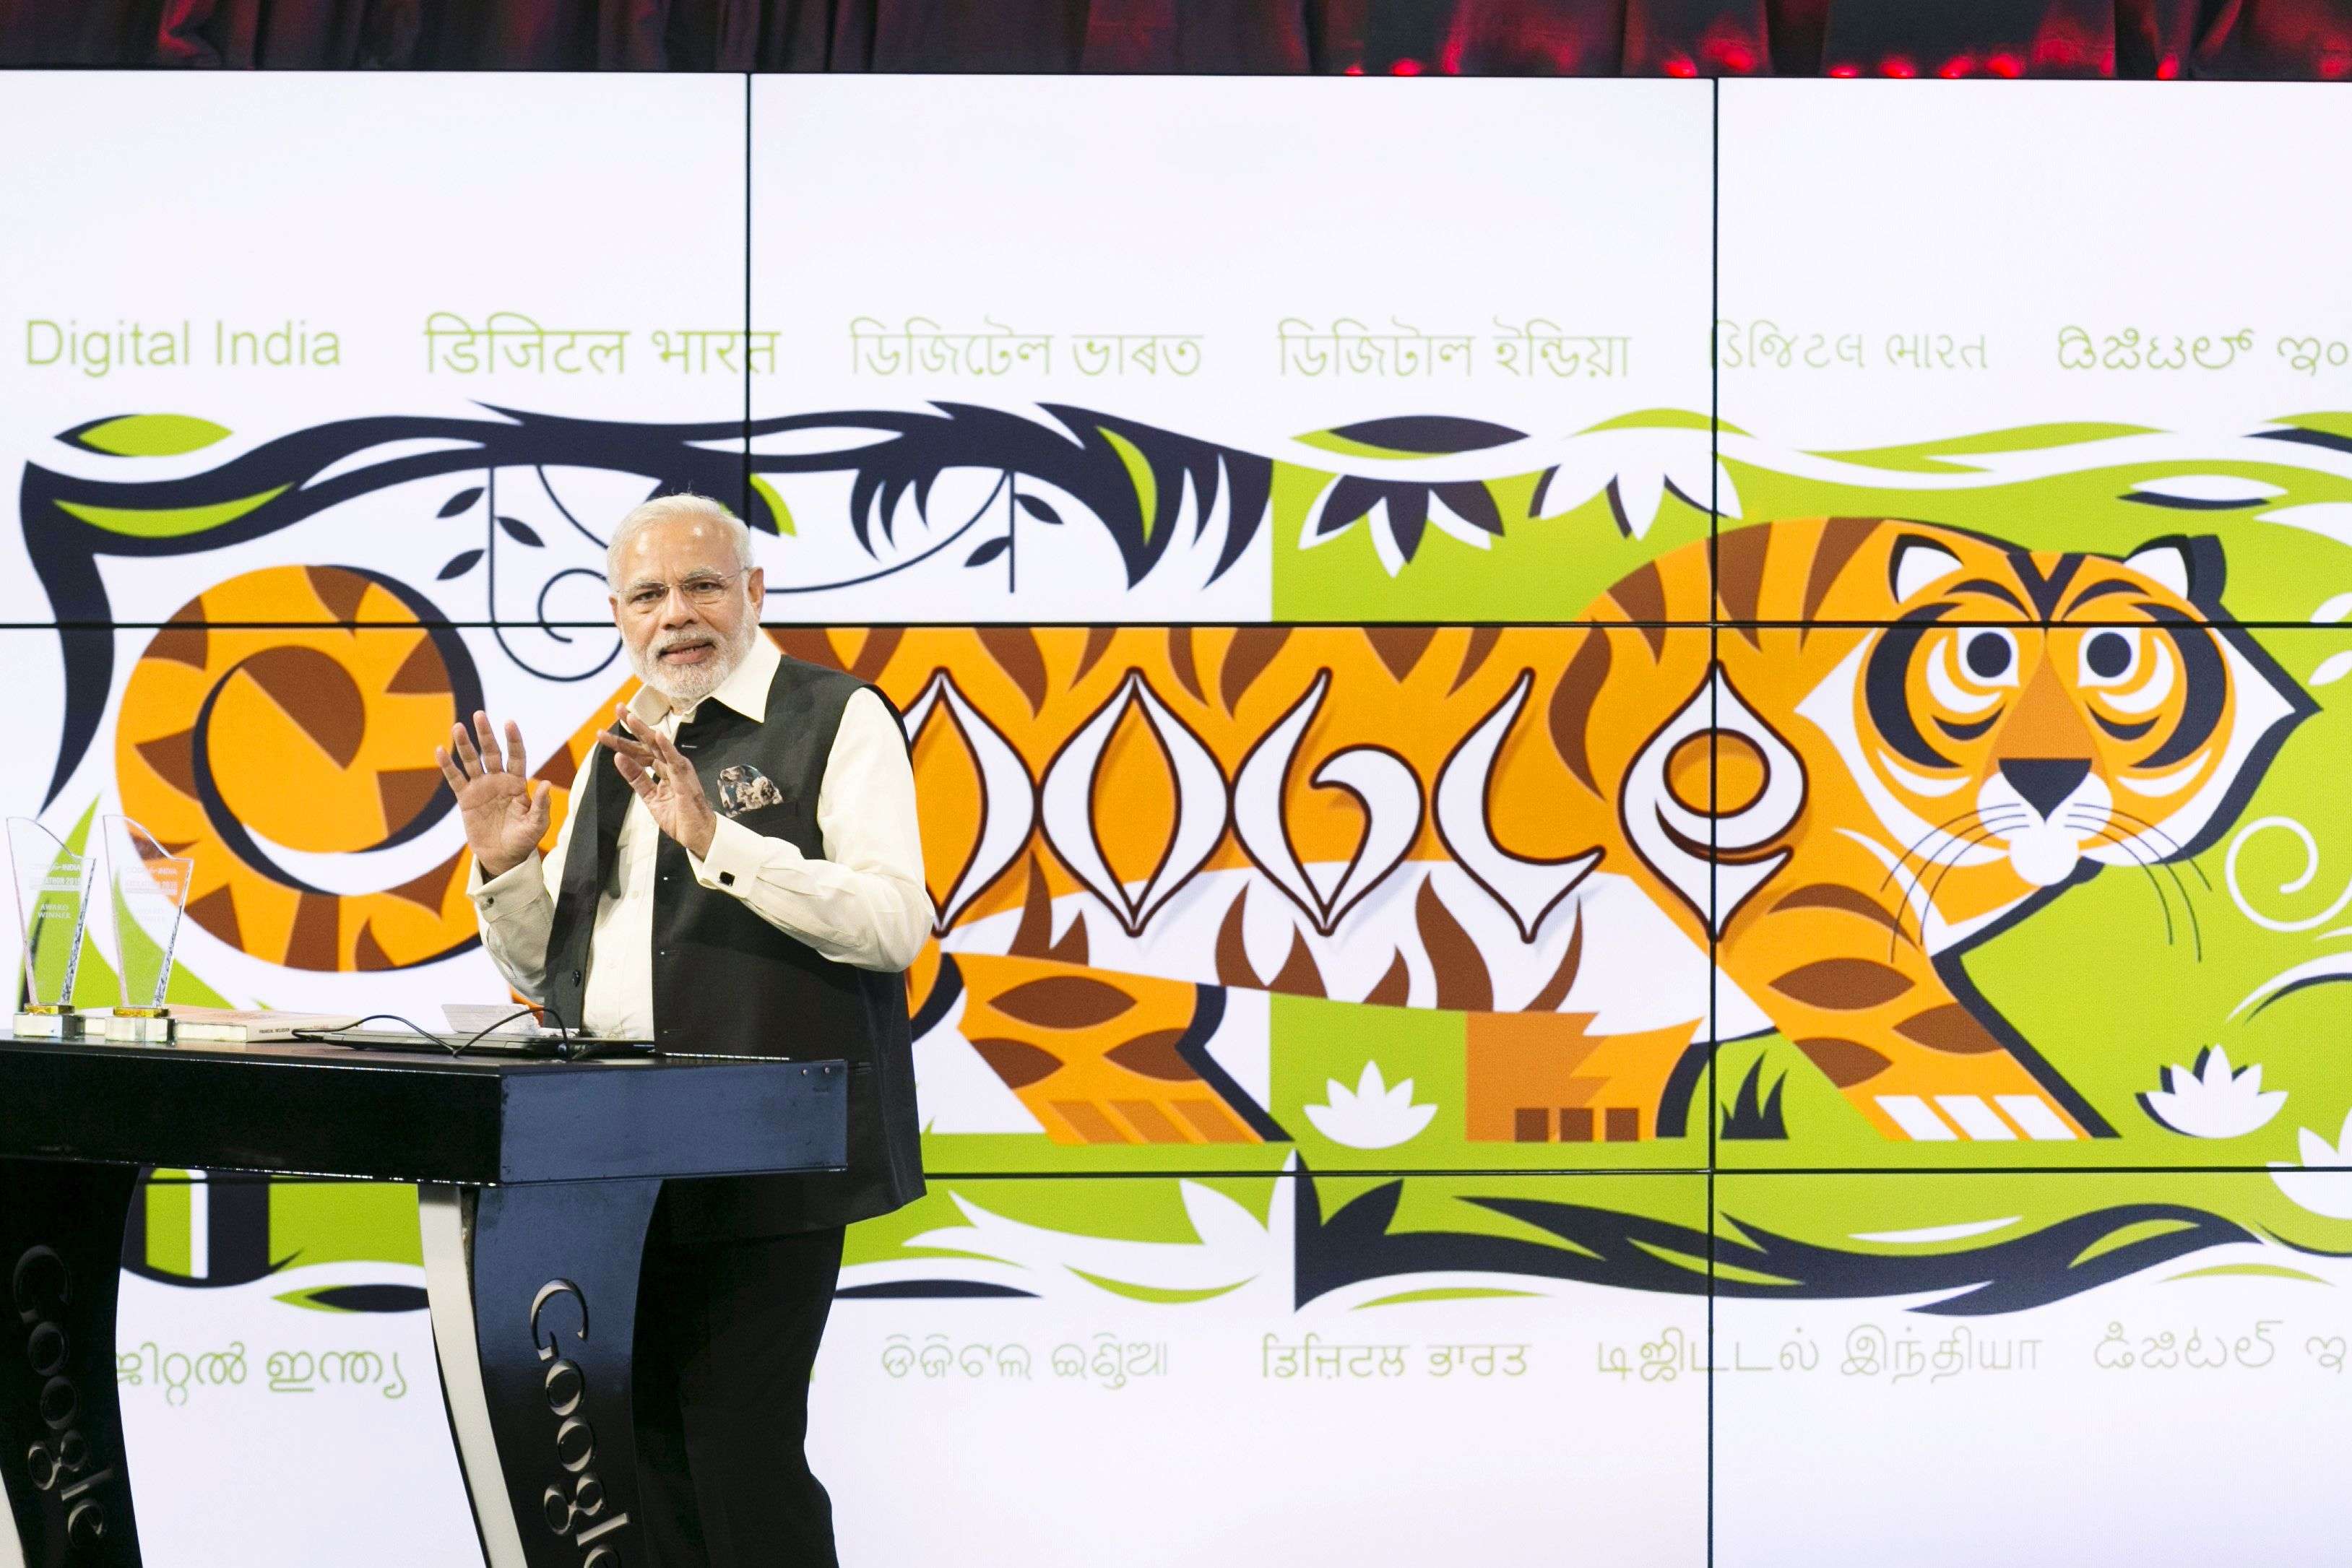 India's Prime Minister Narendra Modi speaks about India's digital initiatives at the Google campus in Mountain View, California September 27, 2015. The Indian premier continues his Silicon Valley tour on Sunday with visits to Facebook and Google Inc headquarters before an event at the San Jose Convention Center that 18,000 people are expected to attend. REUTERS/Elijah Nouvelage